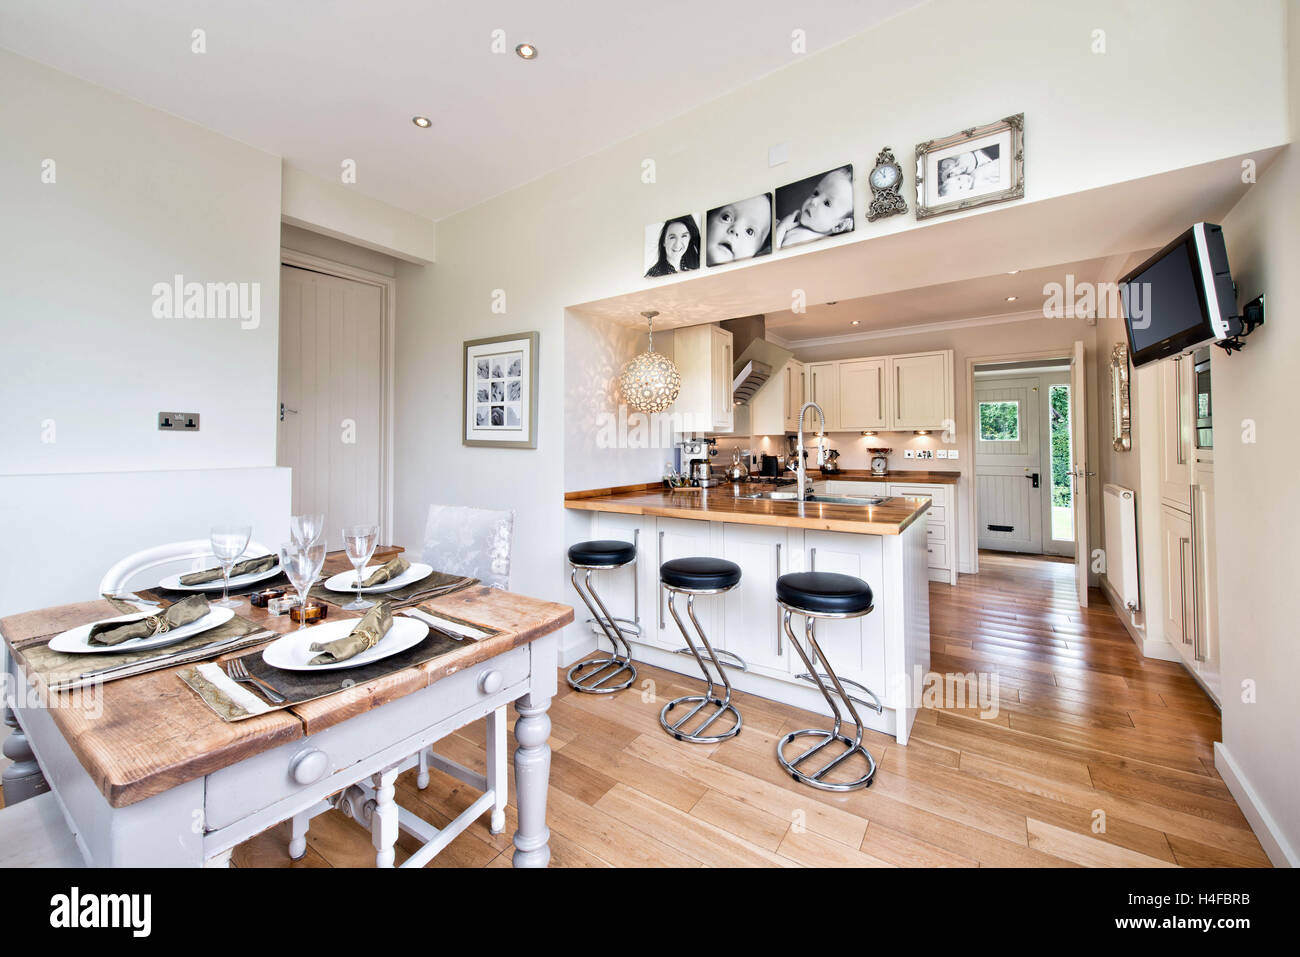 A contemporary country kitchen / dinner, showing dining area, breakfast bar & preparation spaces, Wiltshire,UK. Stock Photo